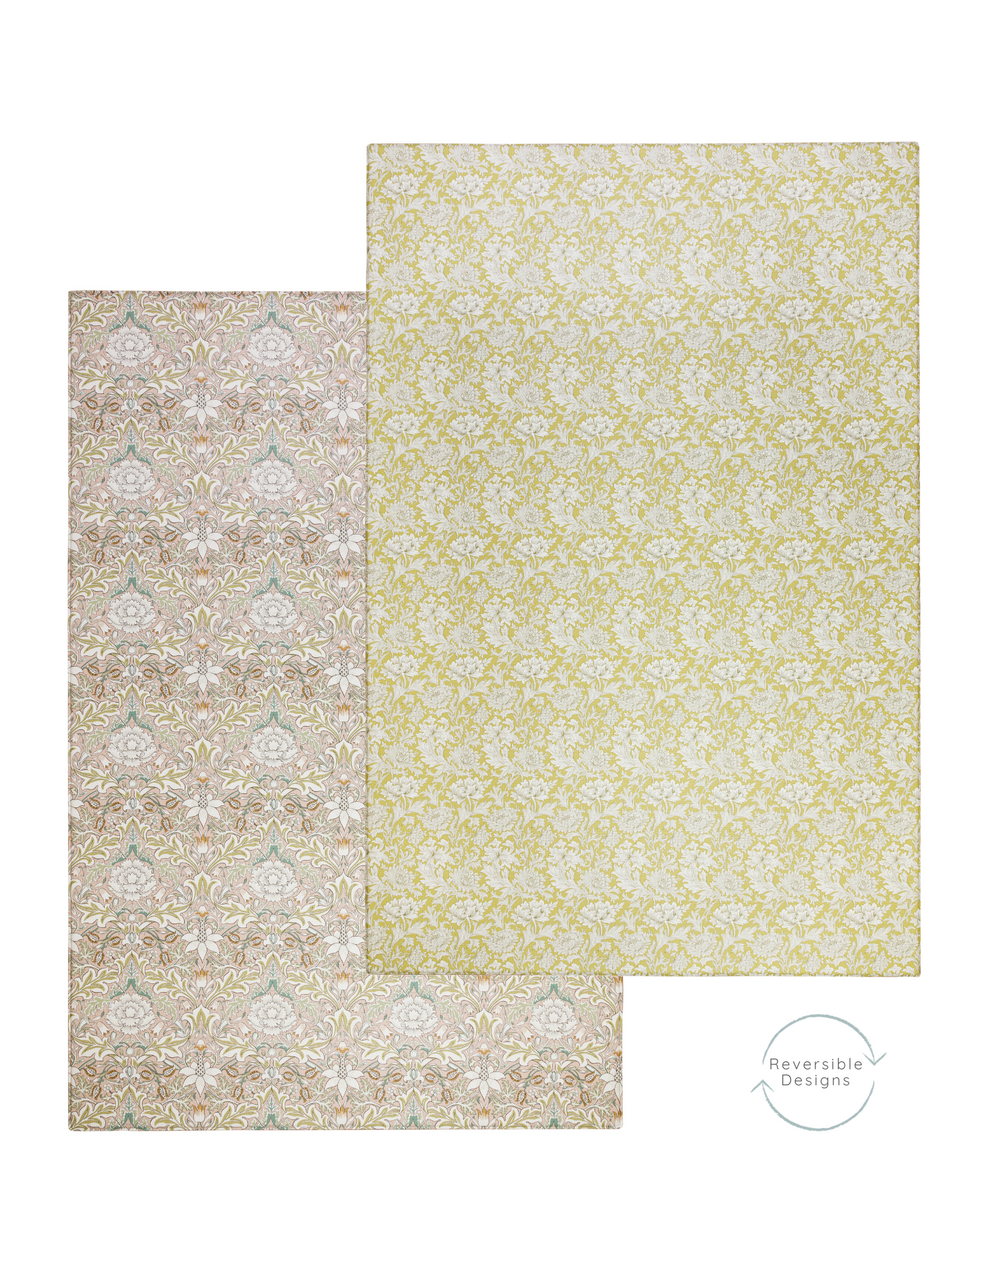 A versatile play mat with a subtle and elegant designs from morris & co. archive